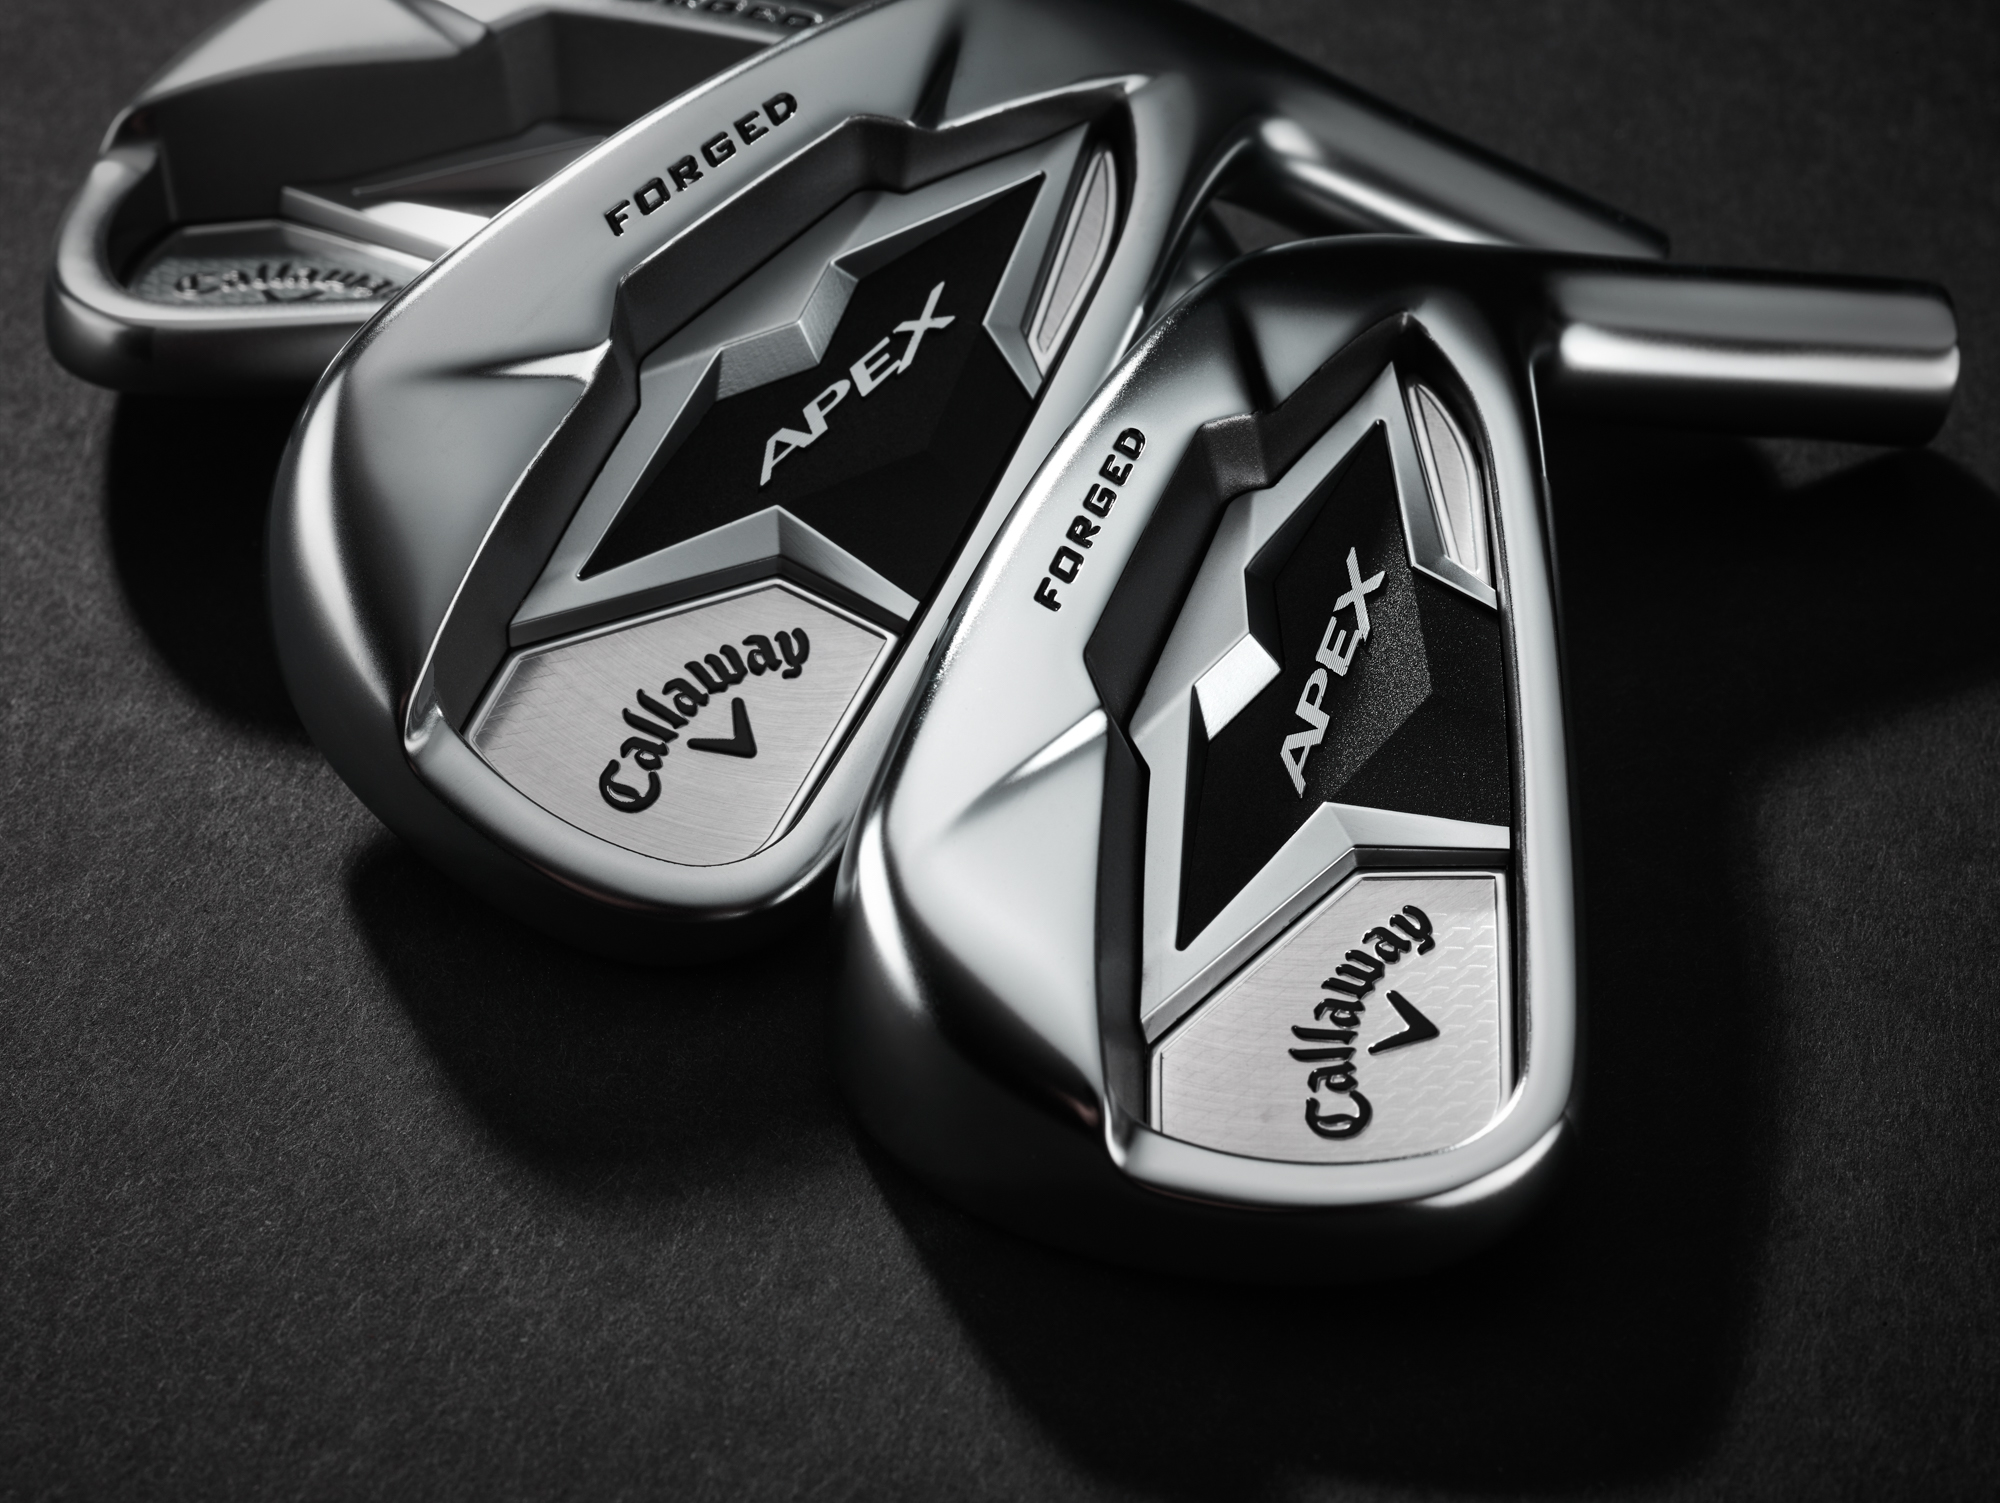 The wait is over. New Callaway Apex, Apex Pro irons and Apex